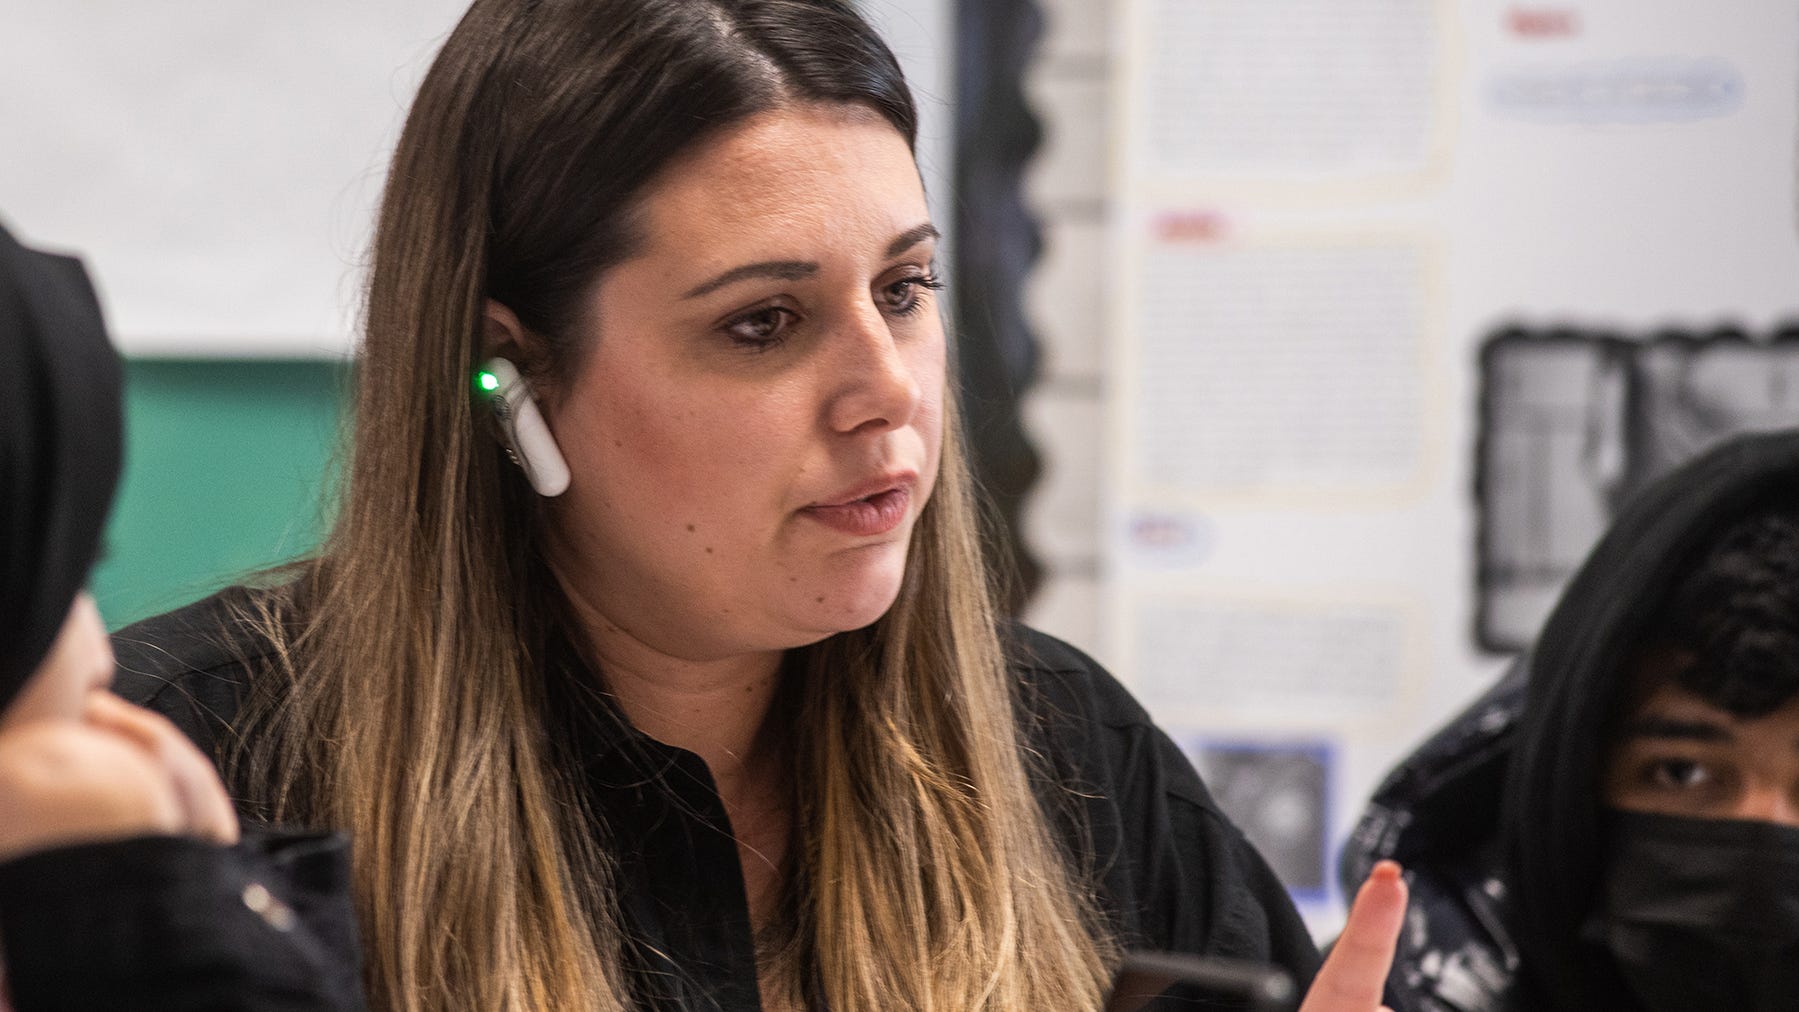 South Middle School social studies teacher Alyssa Cruz converses with her students with the help of the Timekettle WT2 translation device in her ear.